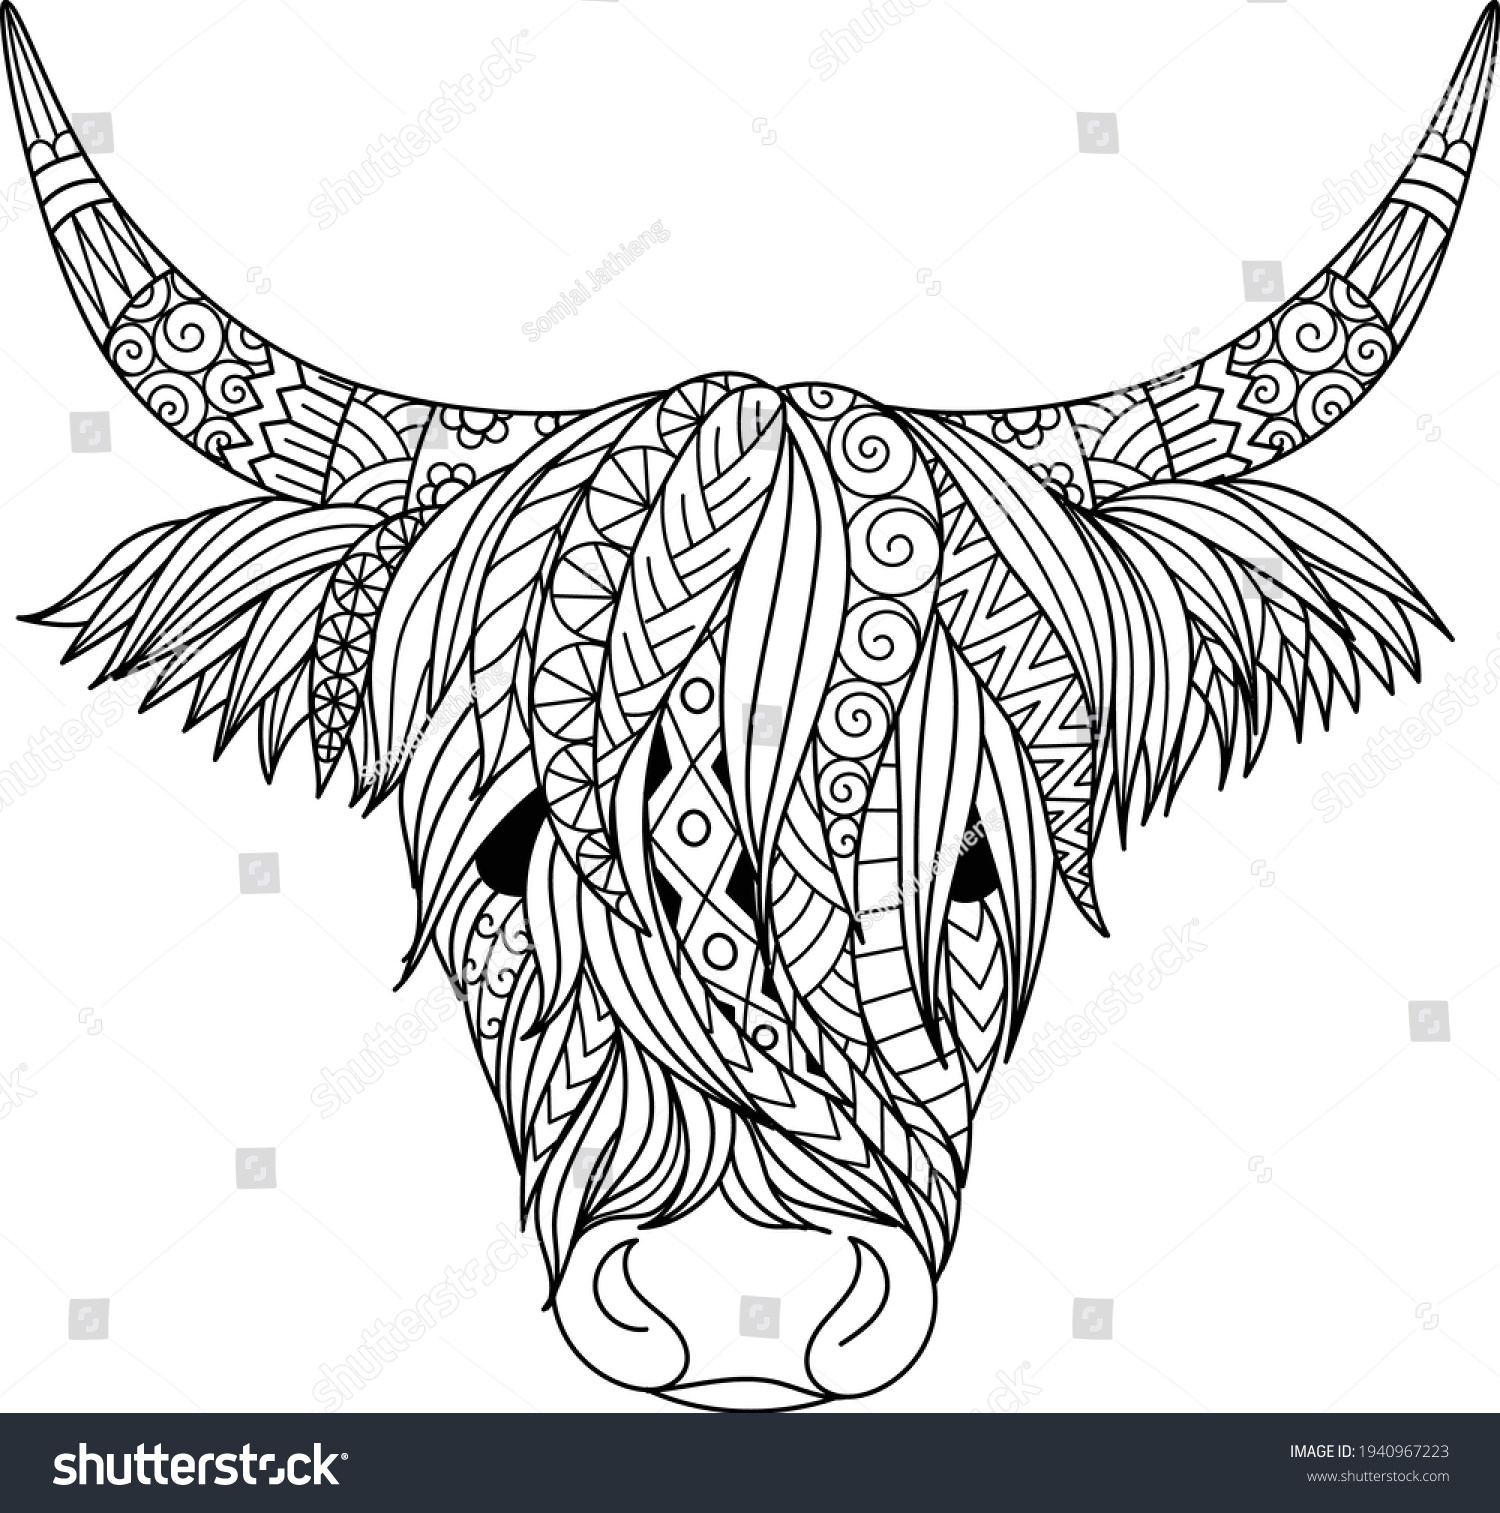 Highland cow design for coloring book coloring Royalty Free Stock